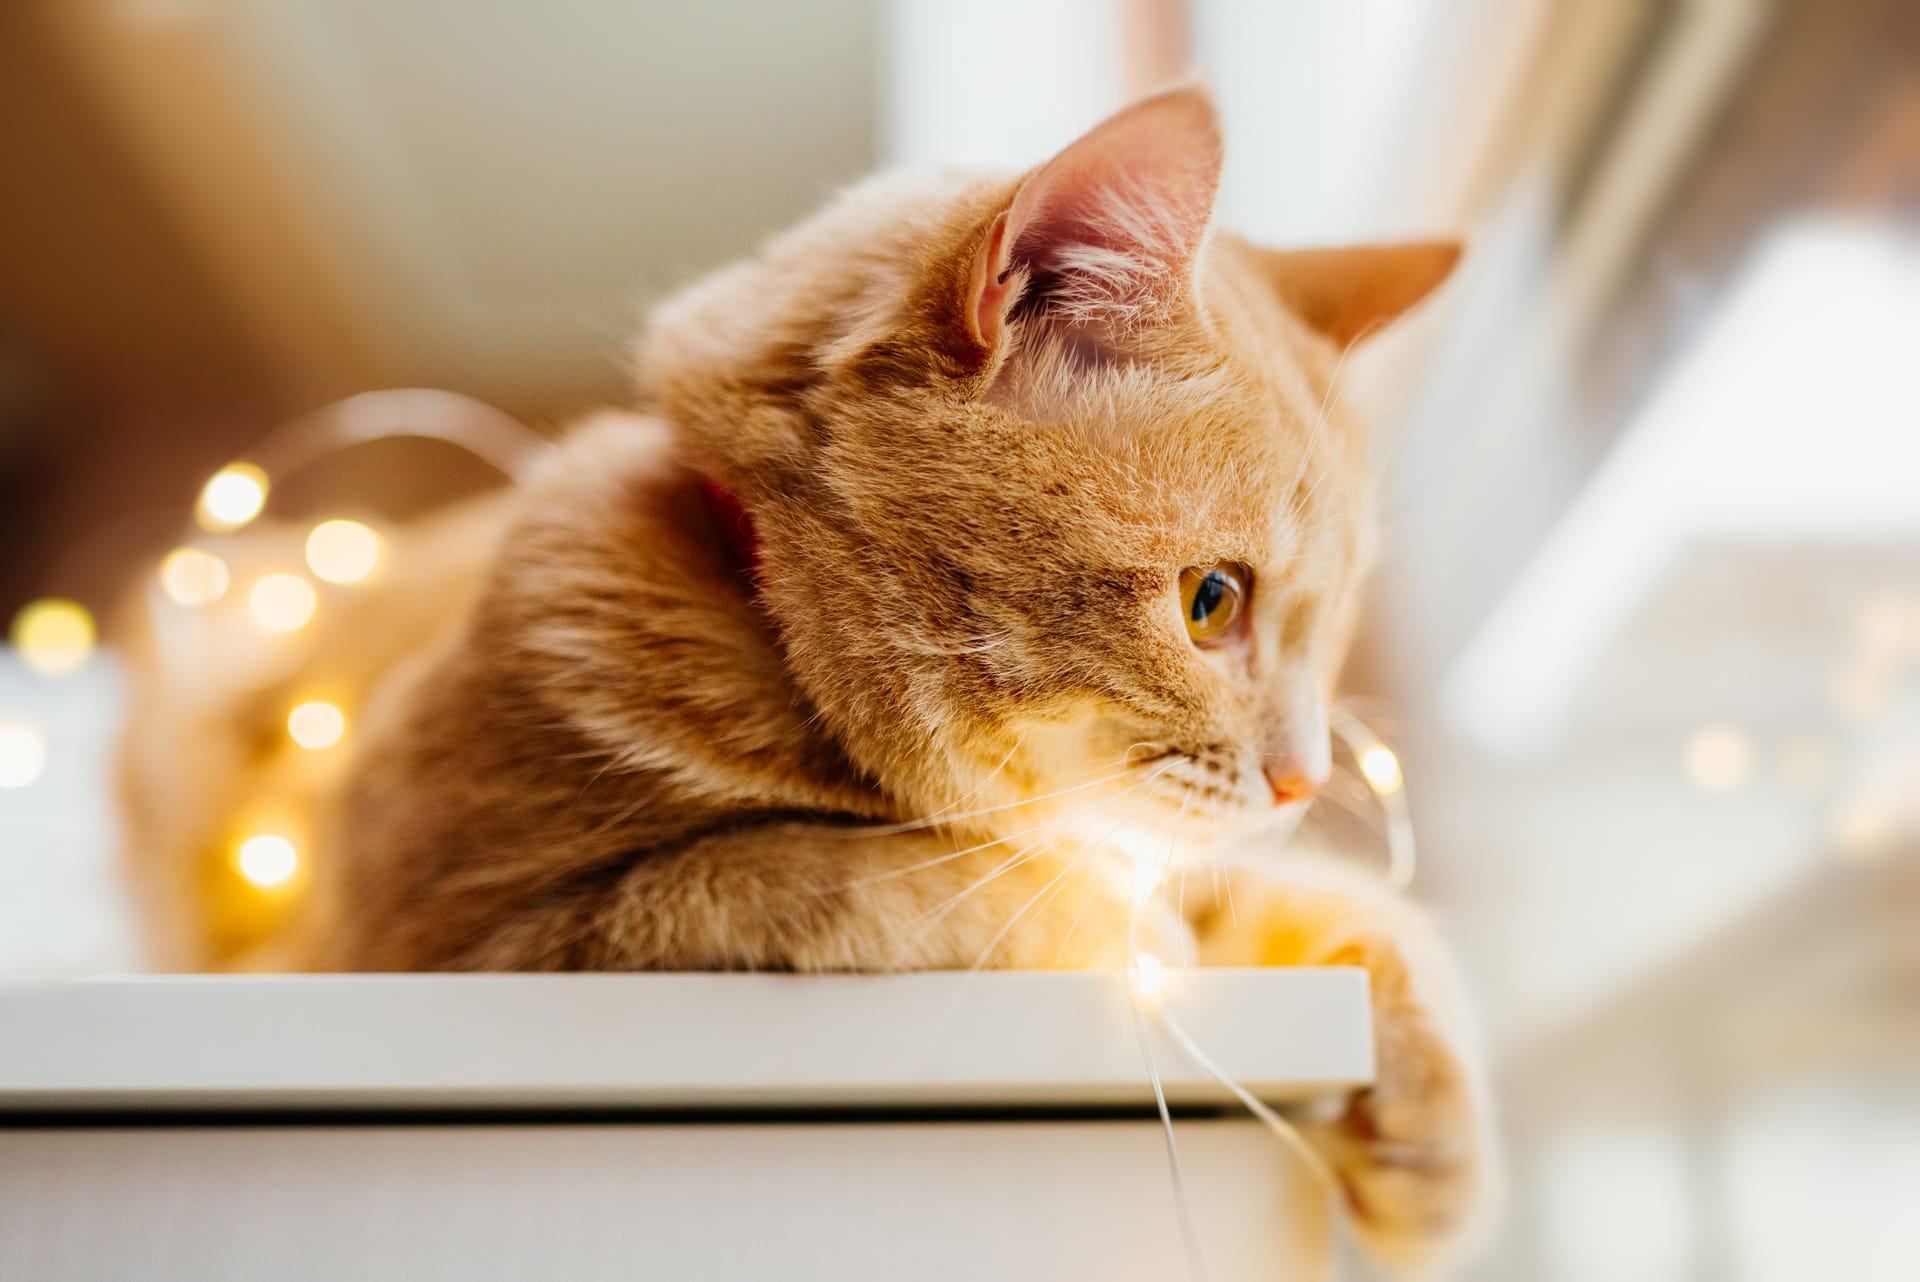 Lights cute ginger cat lying near window play with lights